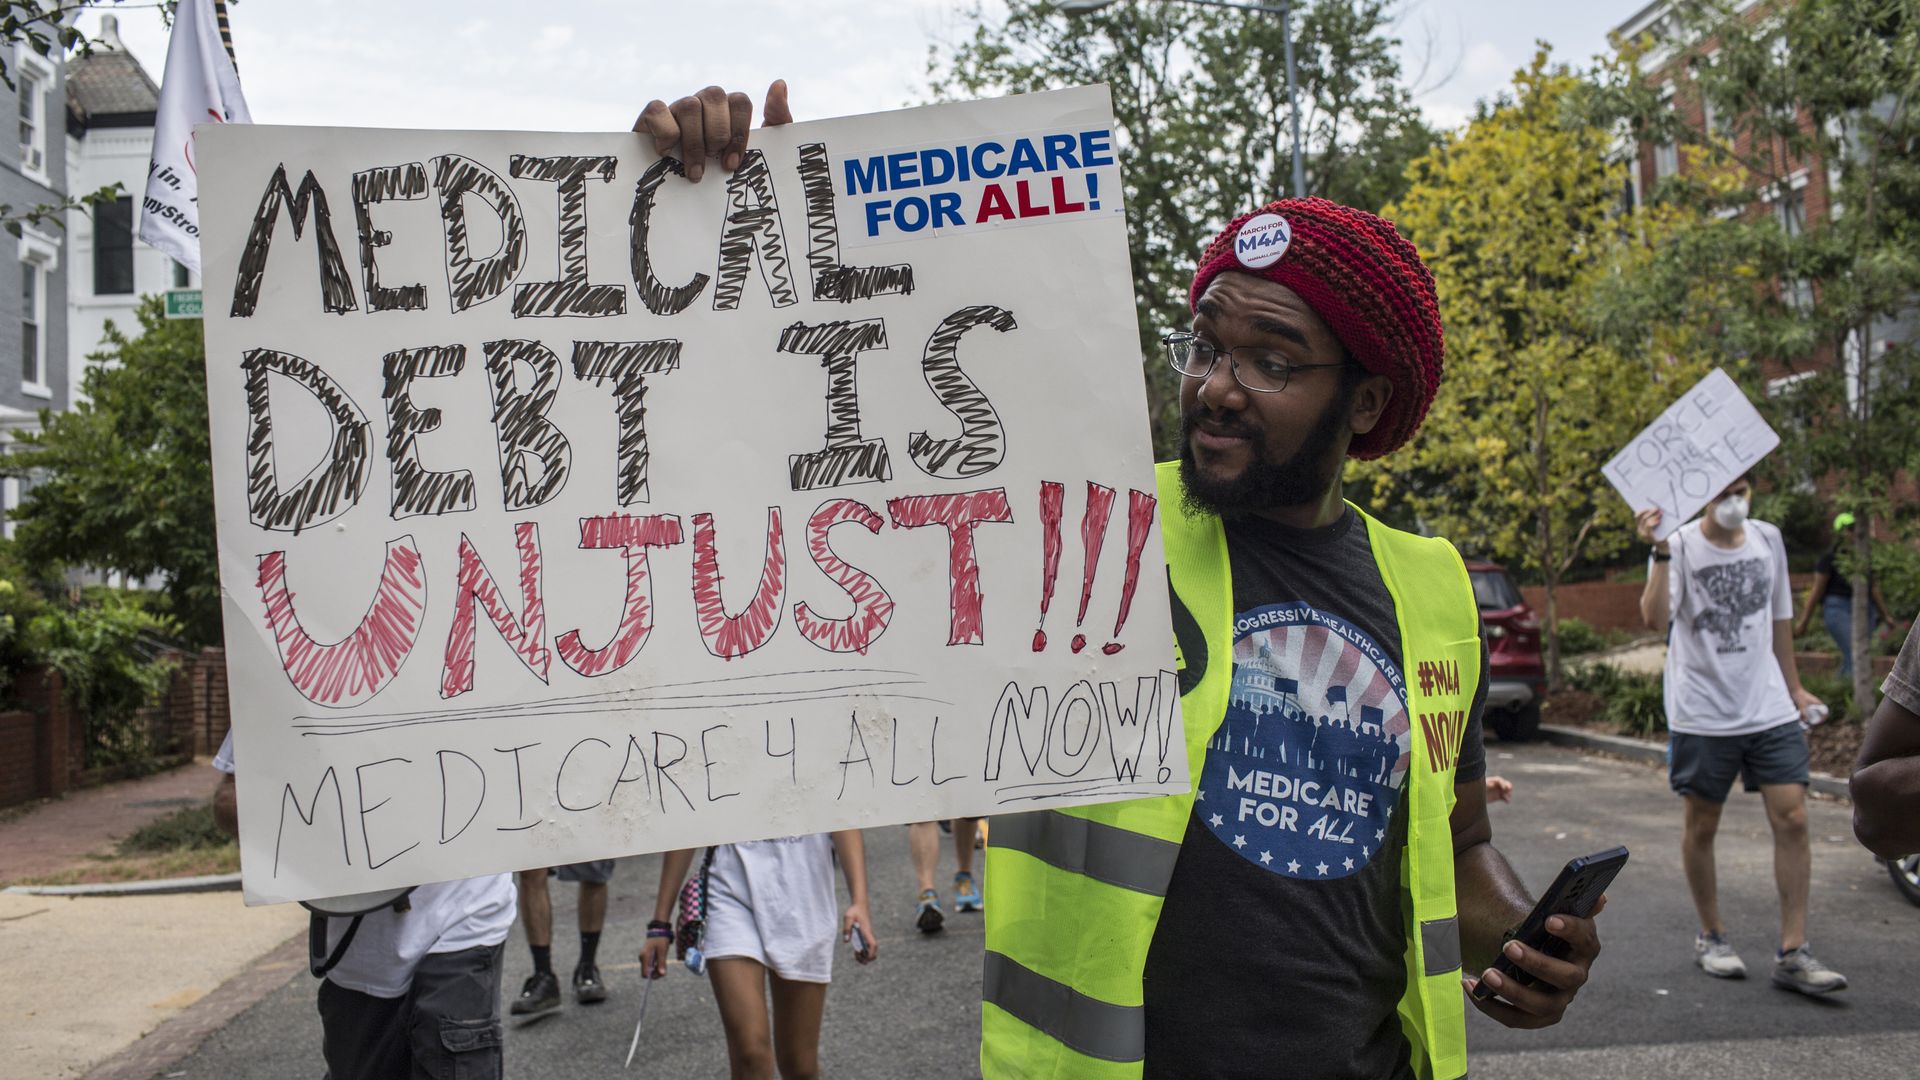 A man holding a sign with "Medical debt is unjust written" on it